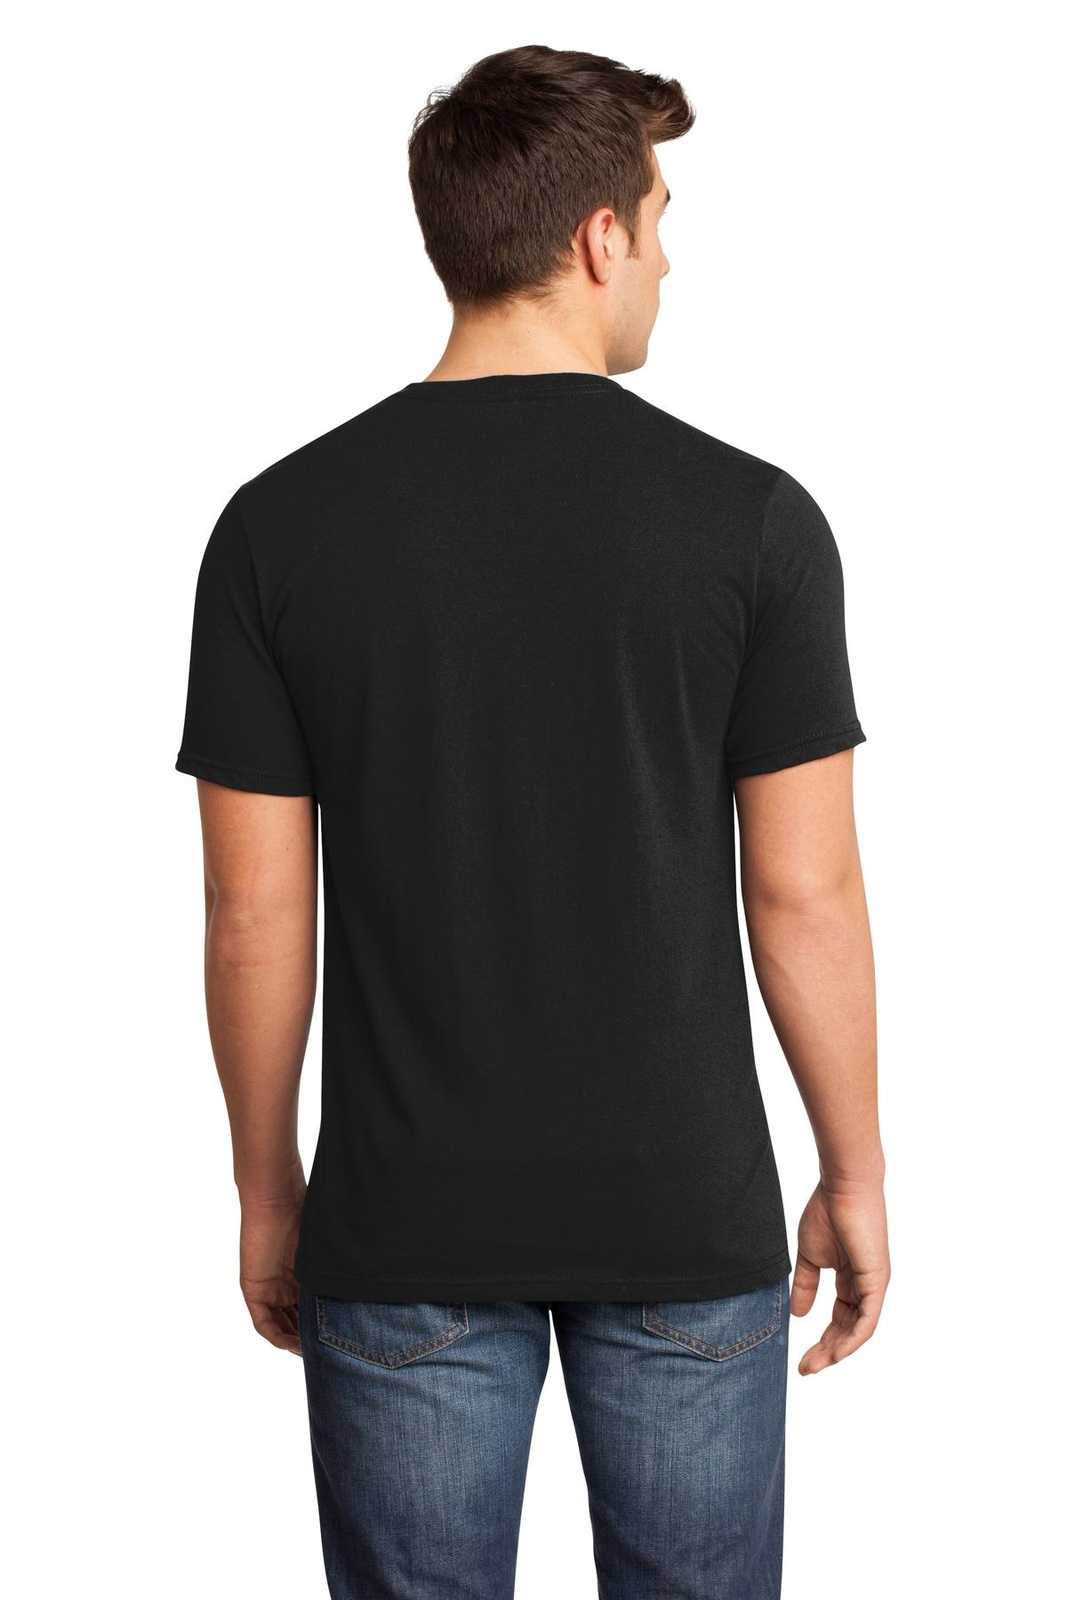 District DT6500 Very Important Tee V-Neck - Black - HIT a Double - 1